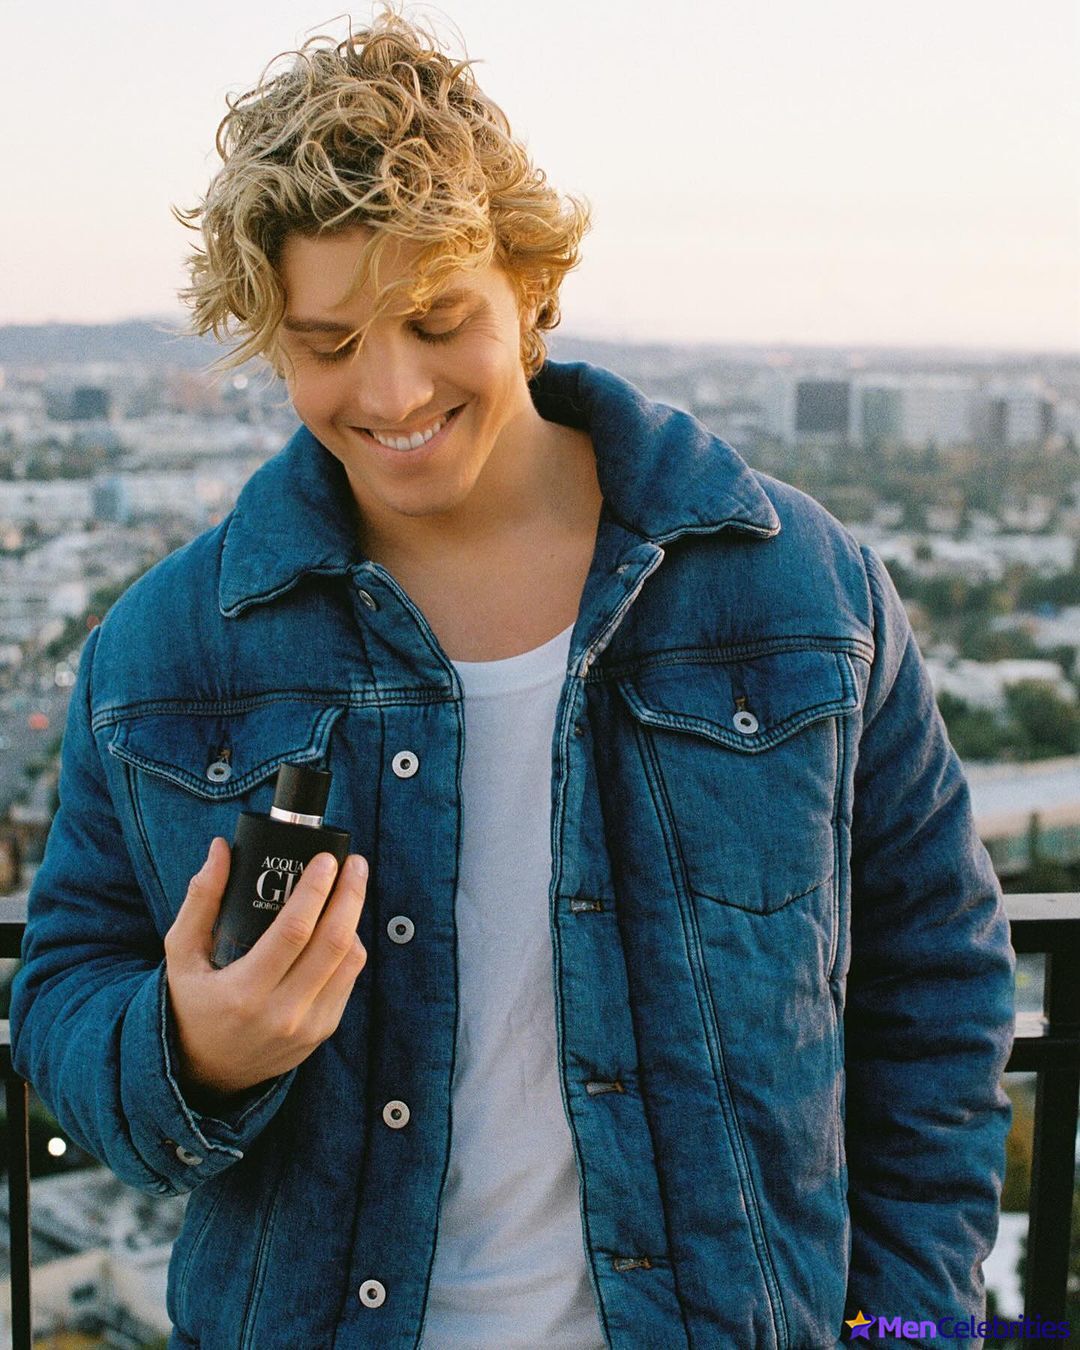 Influencer-Free Zone: Lukas Gage Opens Up About Dating App Shift